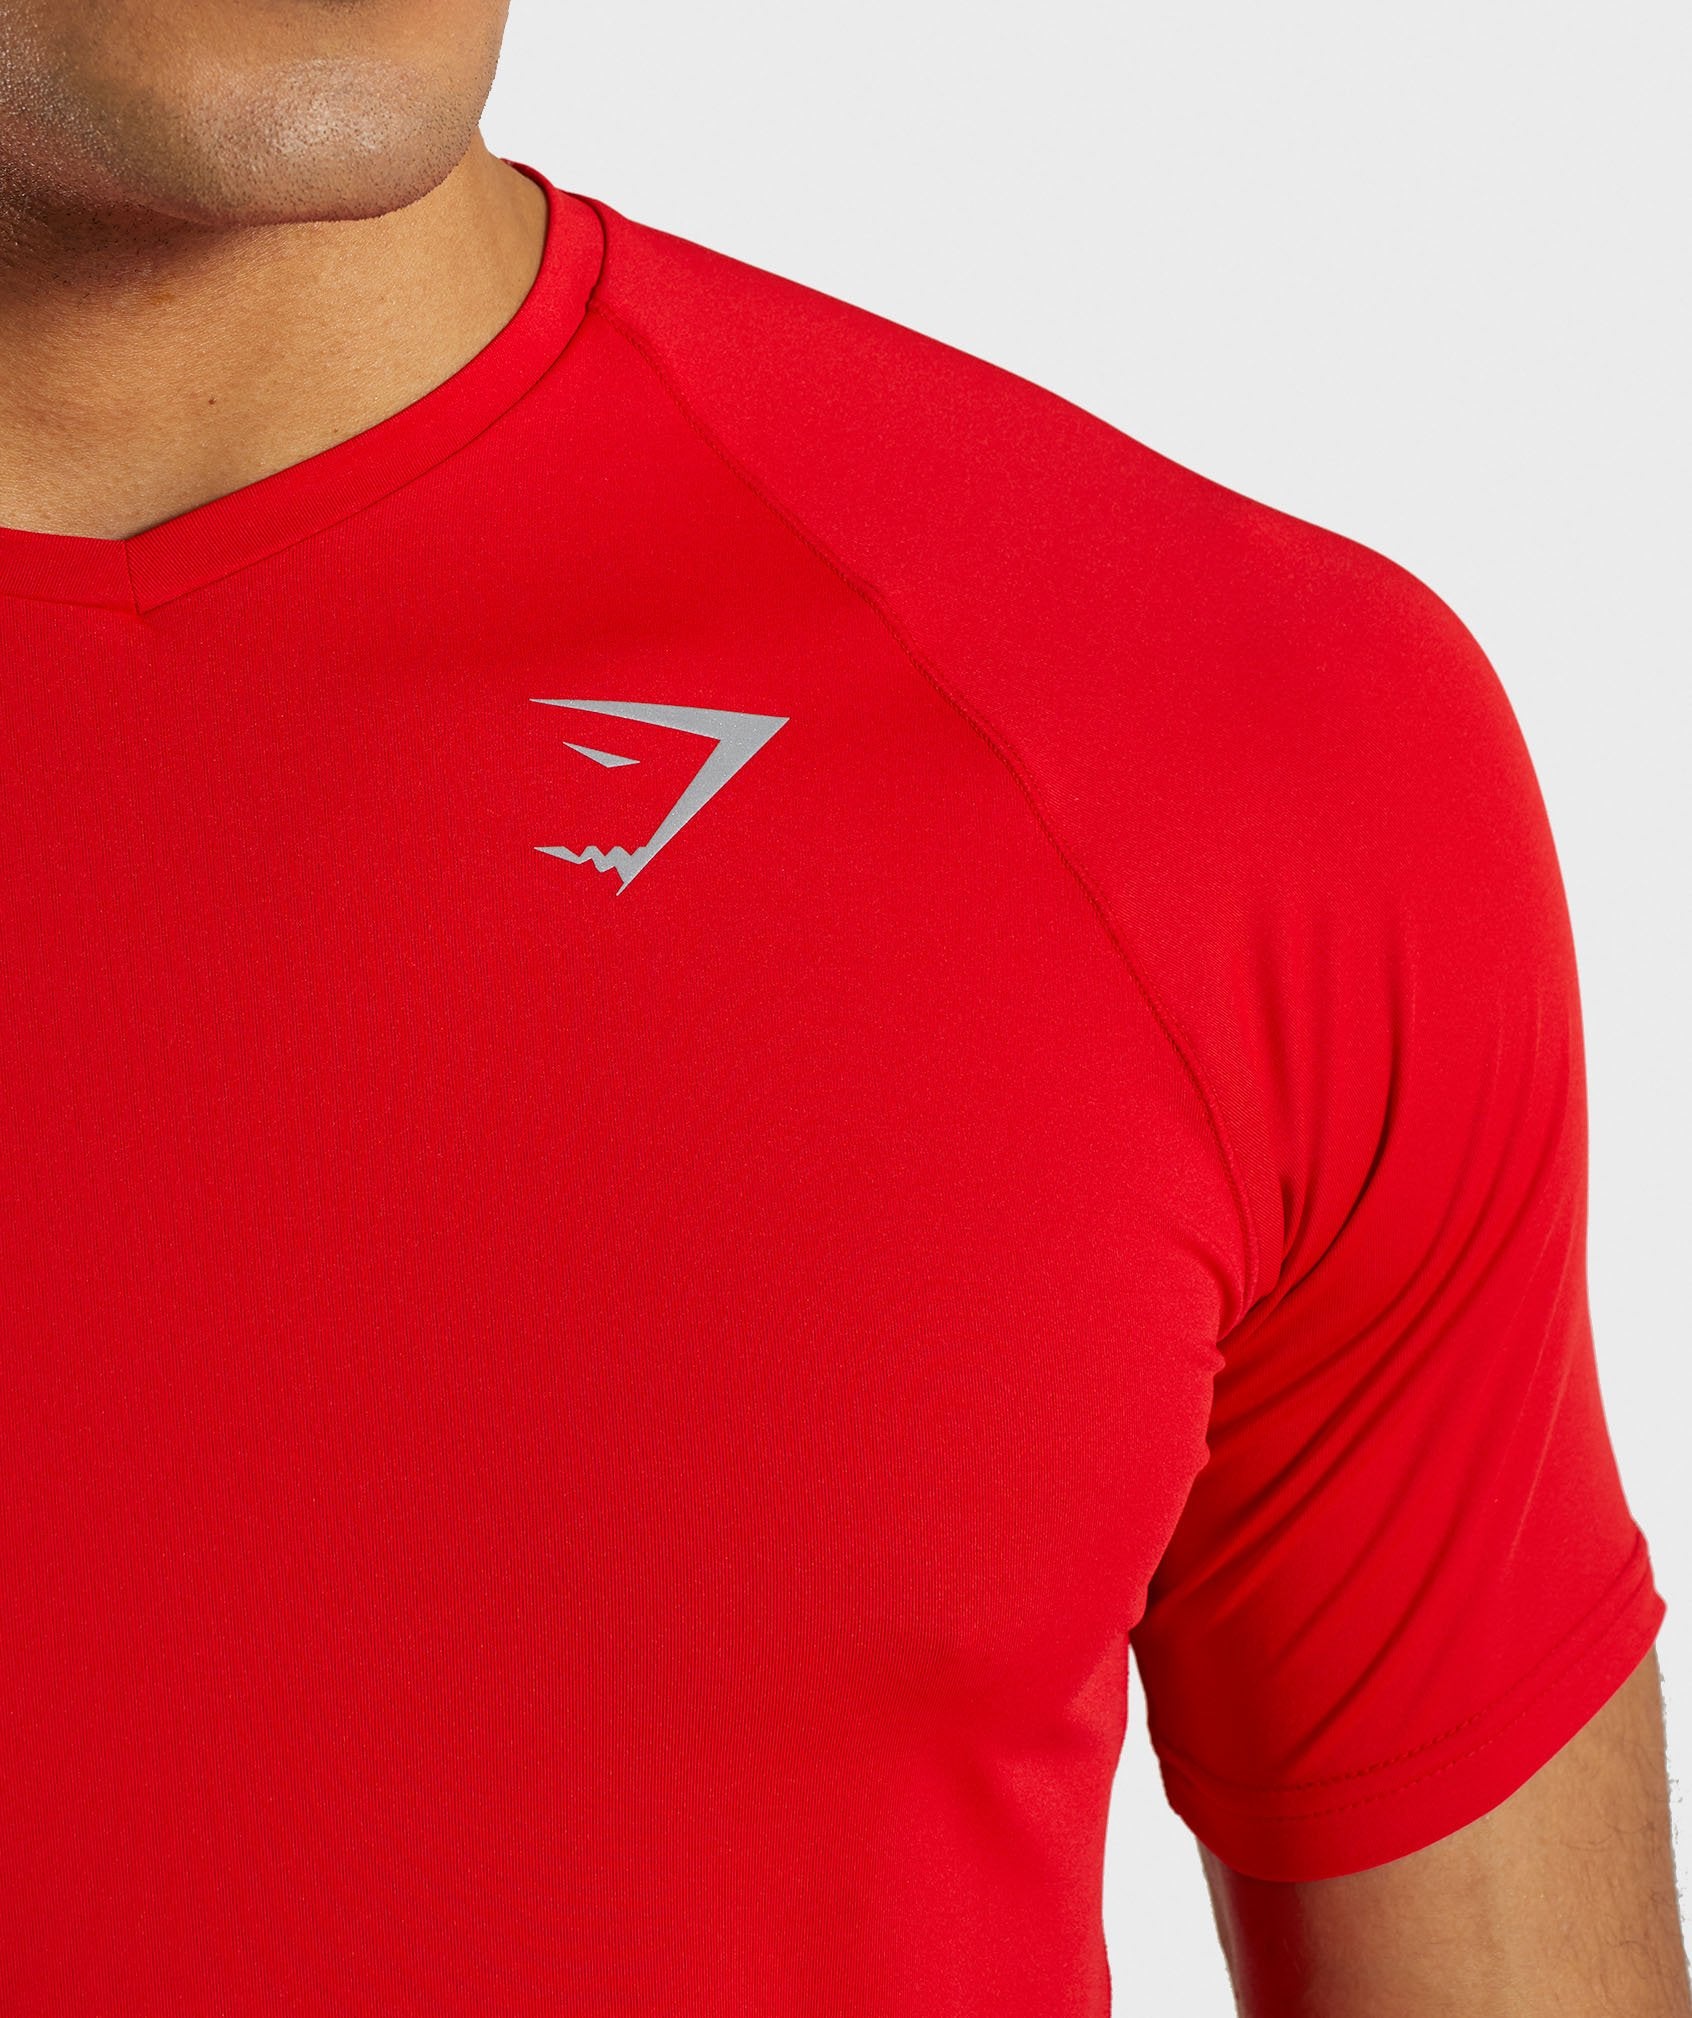 Veer T-Shirt in Red - view 5